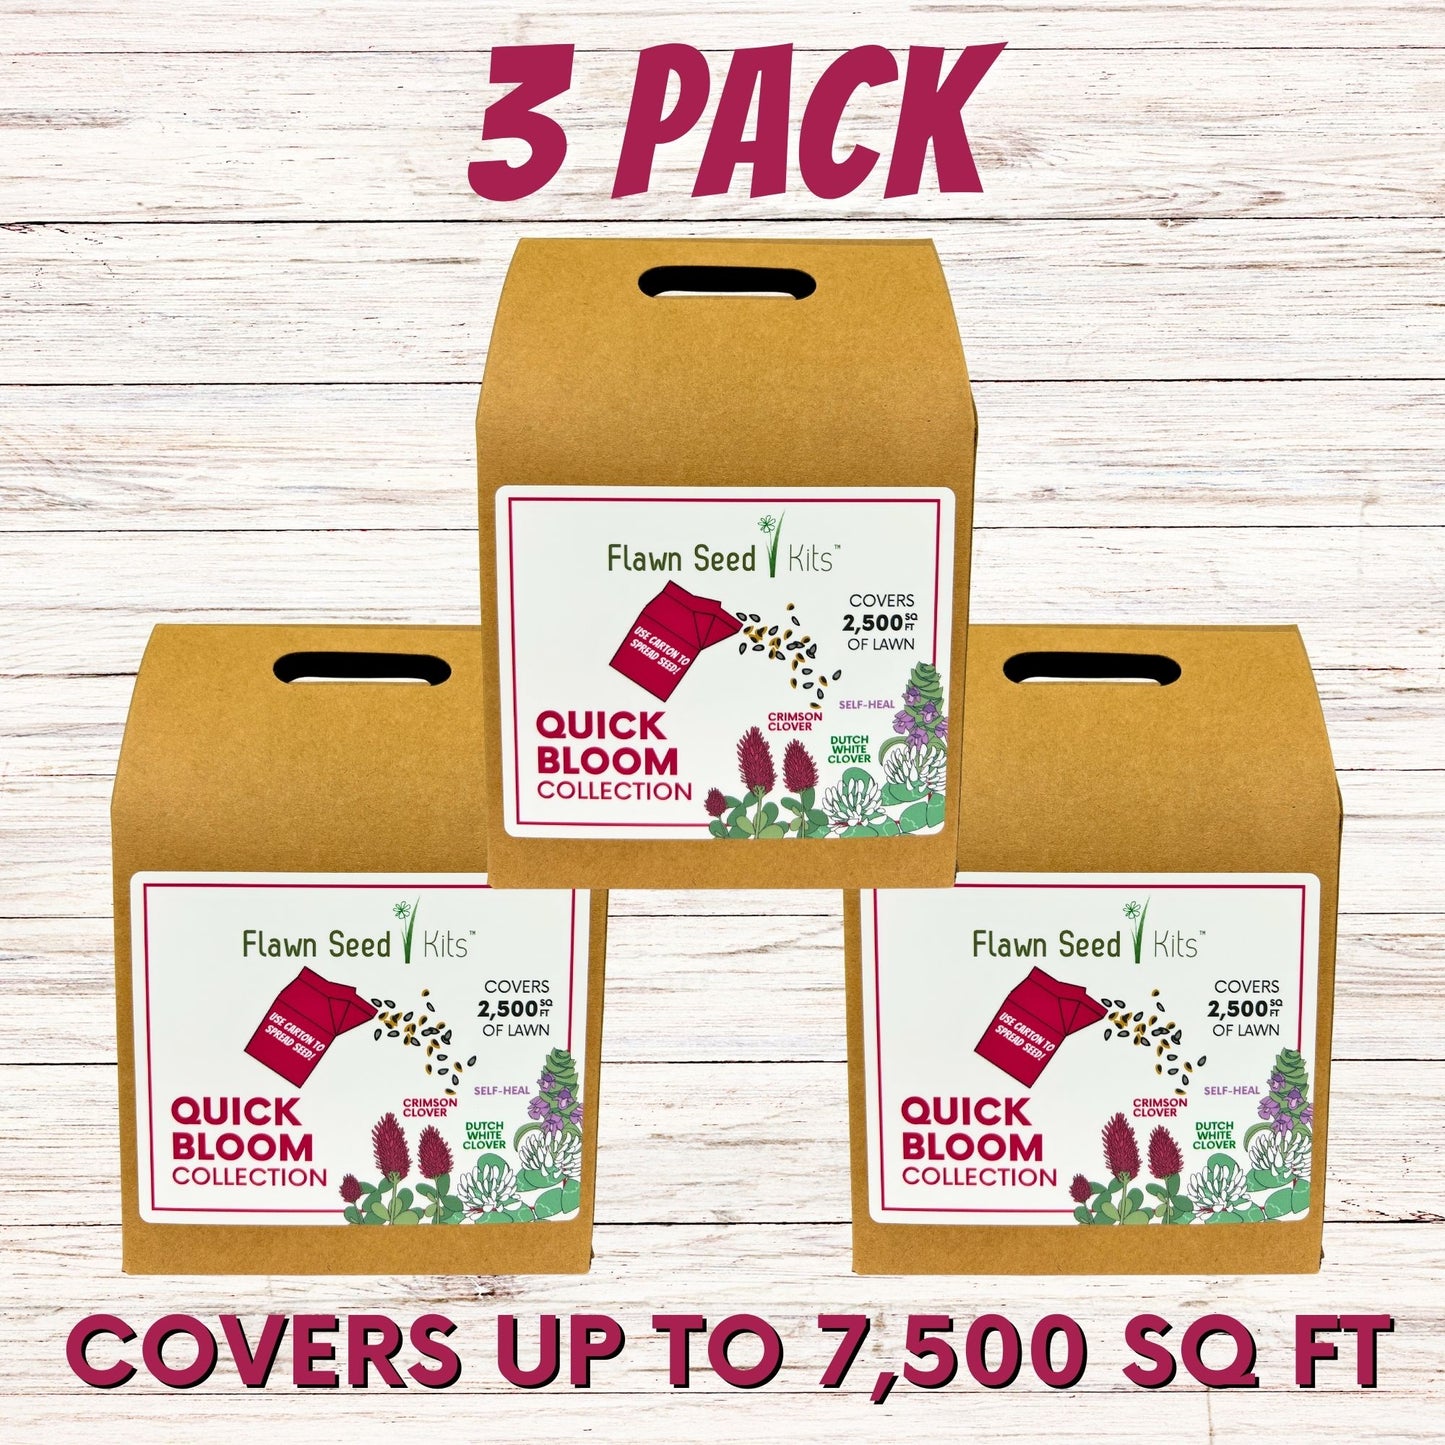 Quick Bloom Kit with Dutch White Clover, Crimson Clover & Self-Heal